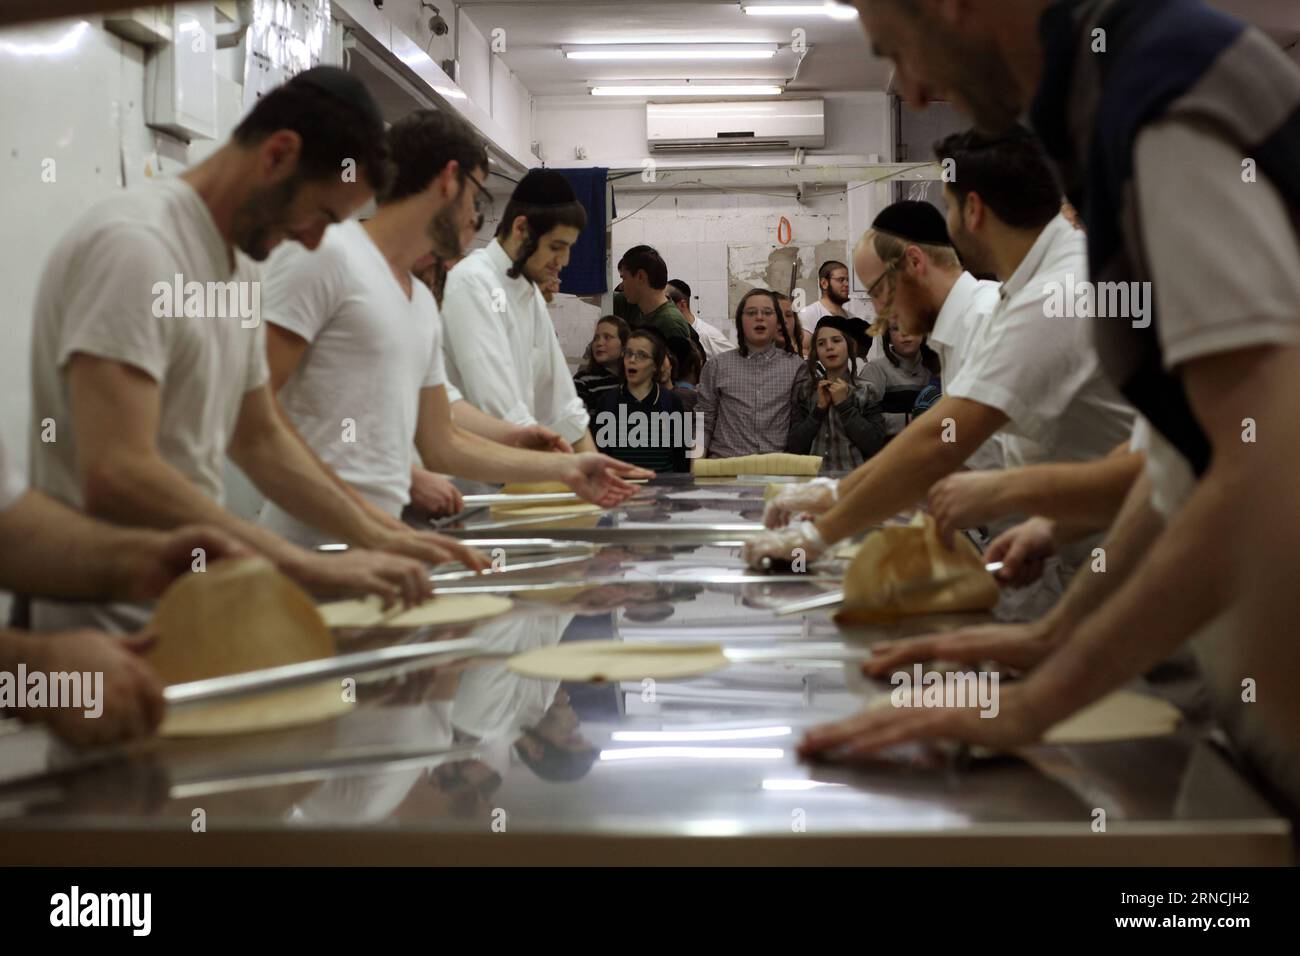 Jewish boys watch the baking of the Matzoth (unleavened bread) during the preparations for the upcoming Jewish Pesach (Passover) holiday on April 13, 2016 in Bnei Brak, near the city of Tel Aviv. Pesach, which will be marked on April 22, 2016, commemorates the Israelites exodus from slavery in Egypt some 3,500 years ago and their plight by refraining from eating leavened food products. ) (lyi) MIDEAST-JERUSALEM-PASSOVER-FOOD GilxCohenxMagen PUBLICATIONxNOTxINxCHN   Jewish Boys Watch The Baking of The matzoth unleavened BREAD during The preparations for The upcoming Jewish Pesach Passover Holid Stock Photo